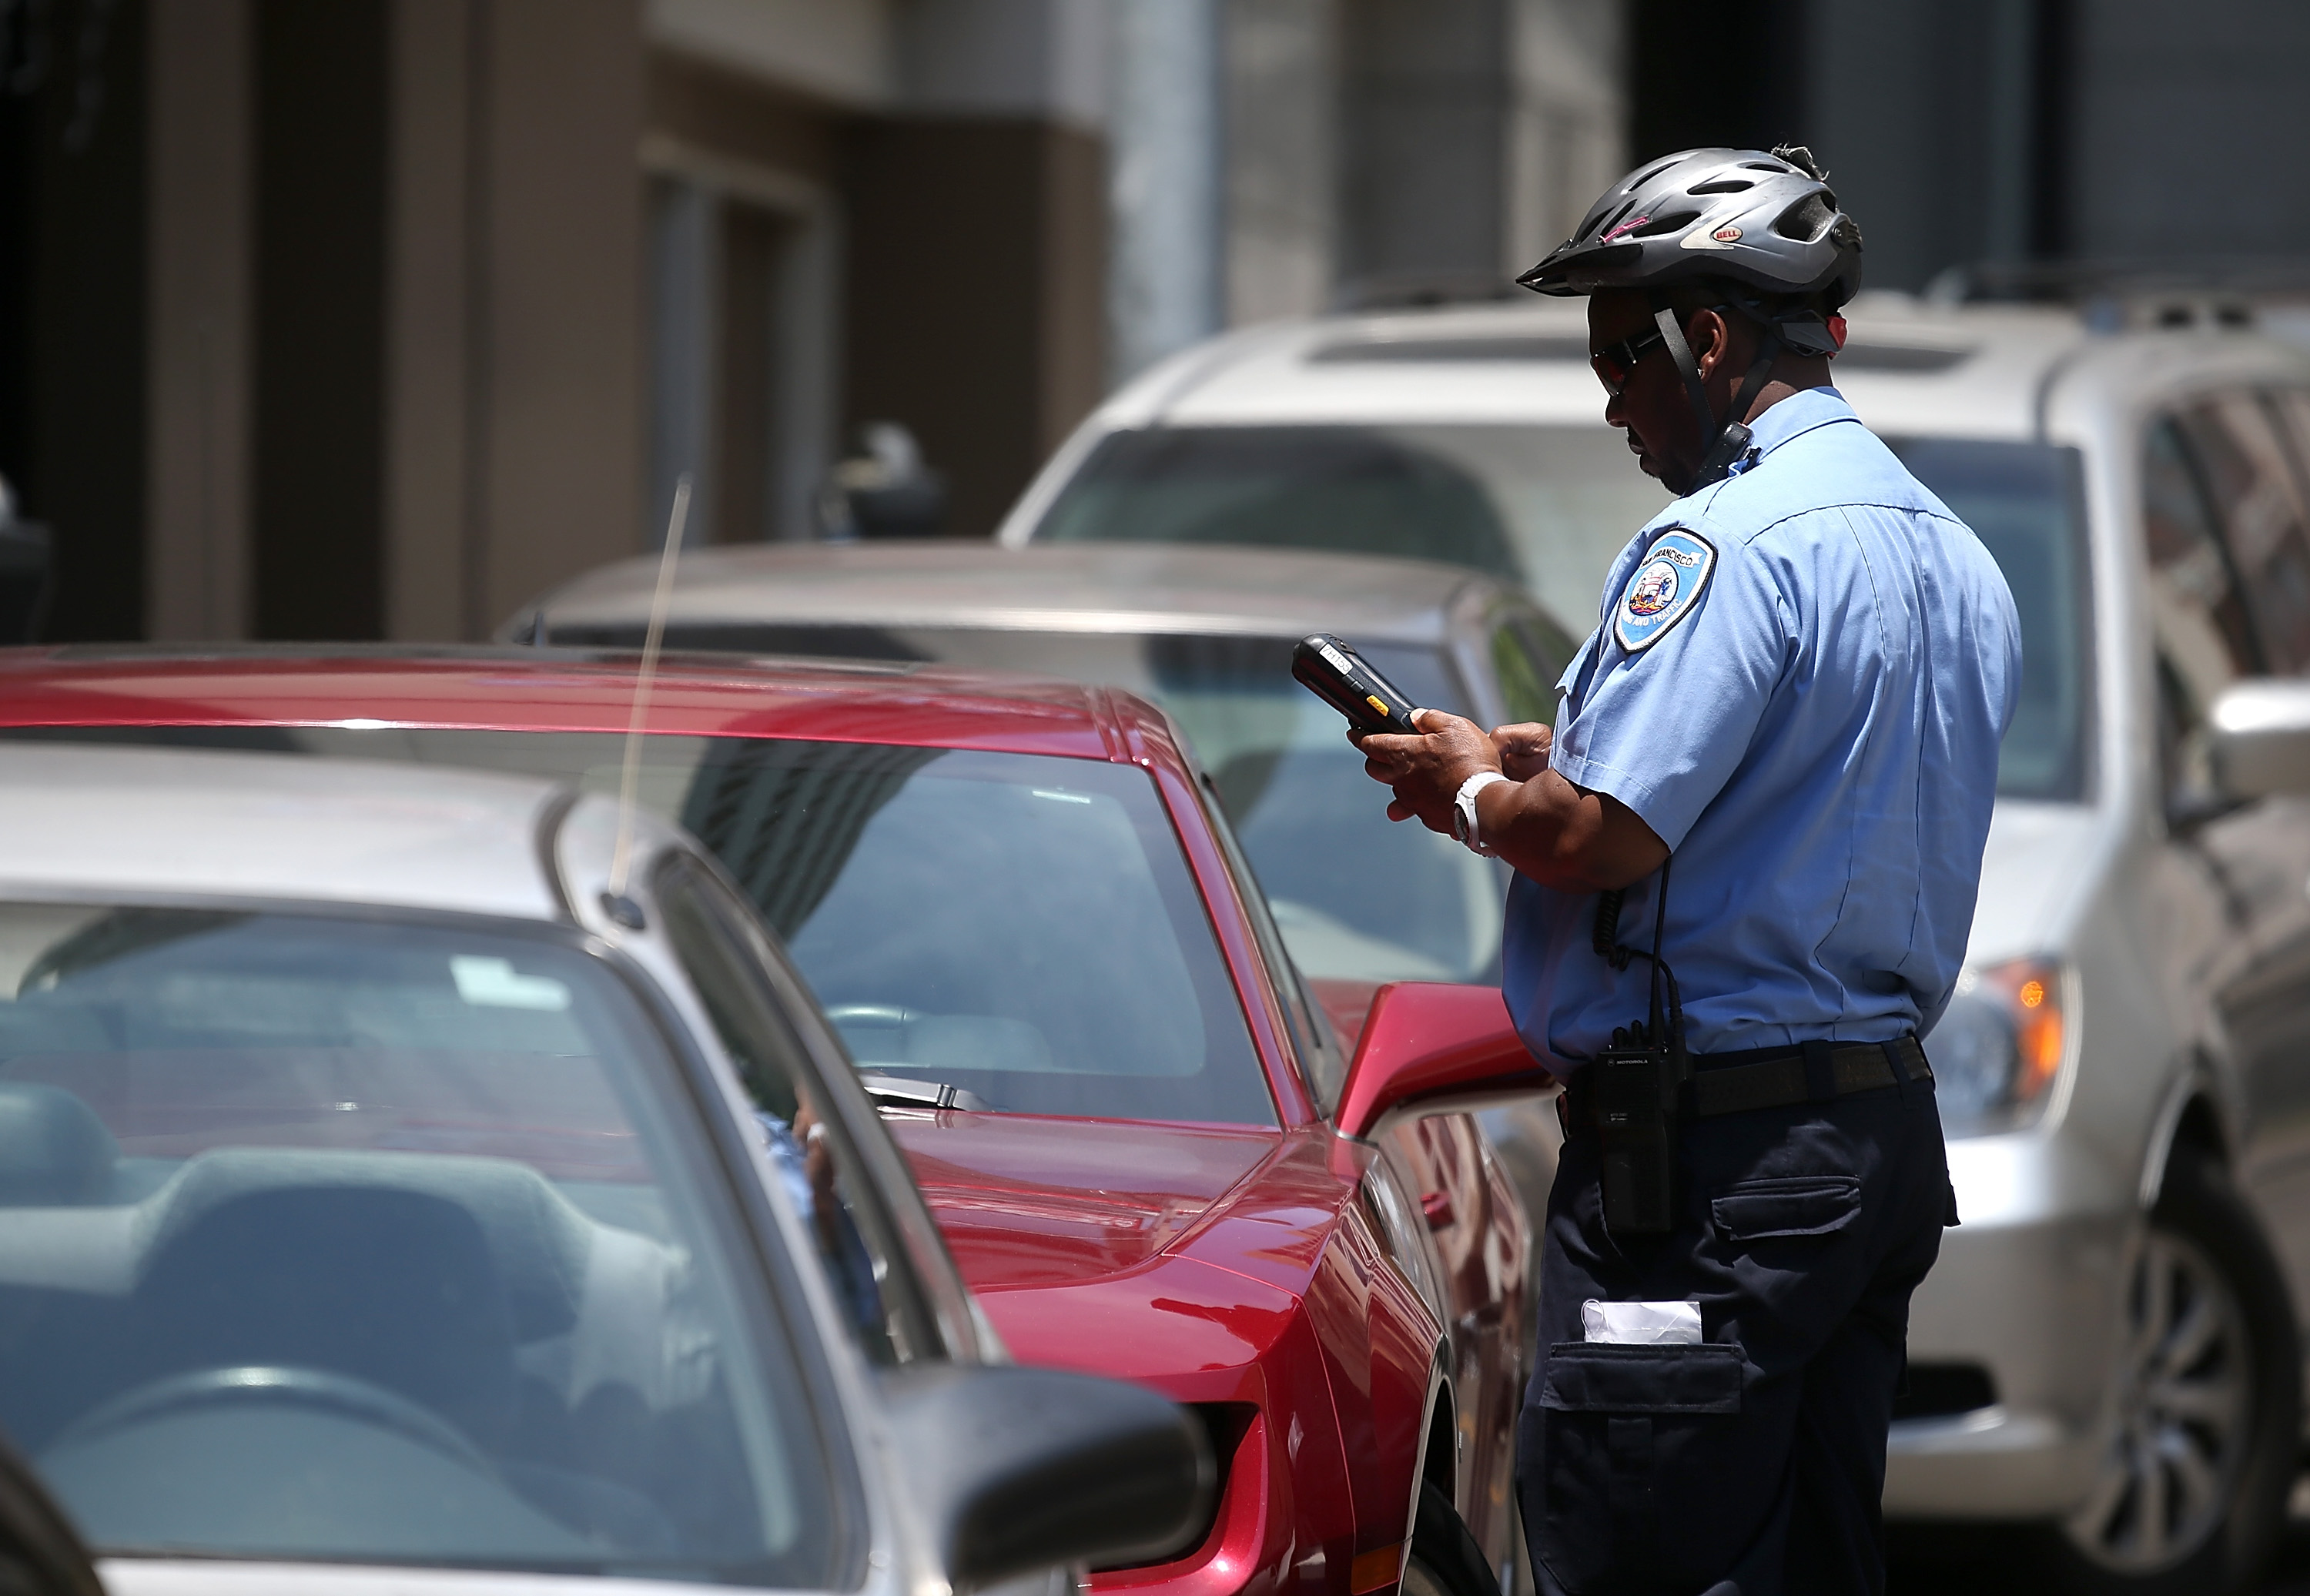 A San Francisco Municipal Transportation Agency parking control officer writes a parking ticket for an illegally parked car on July 3, 2013 in San Francisco.